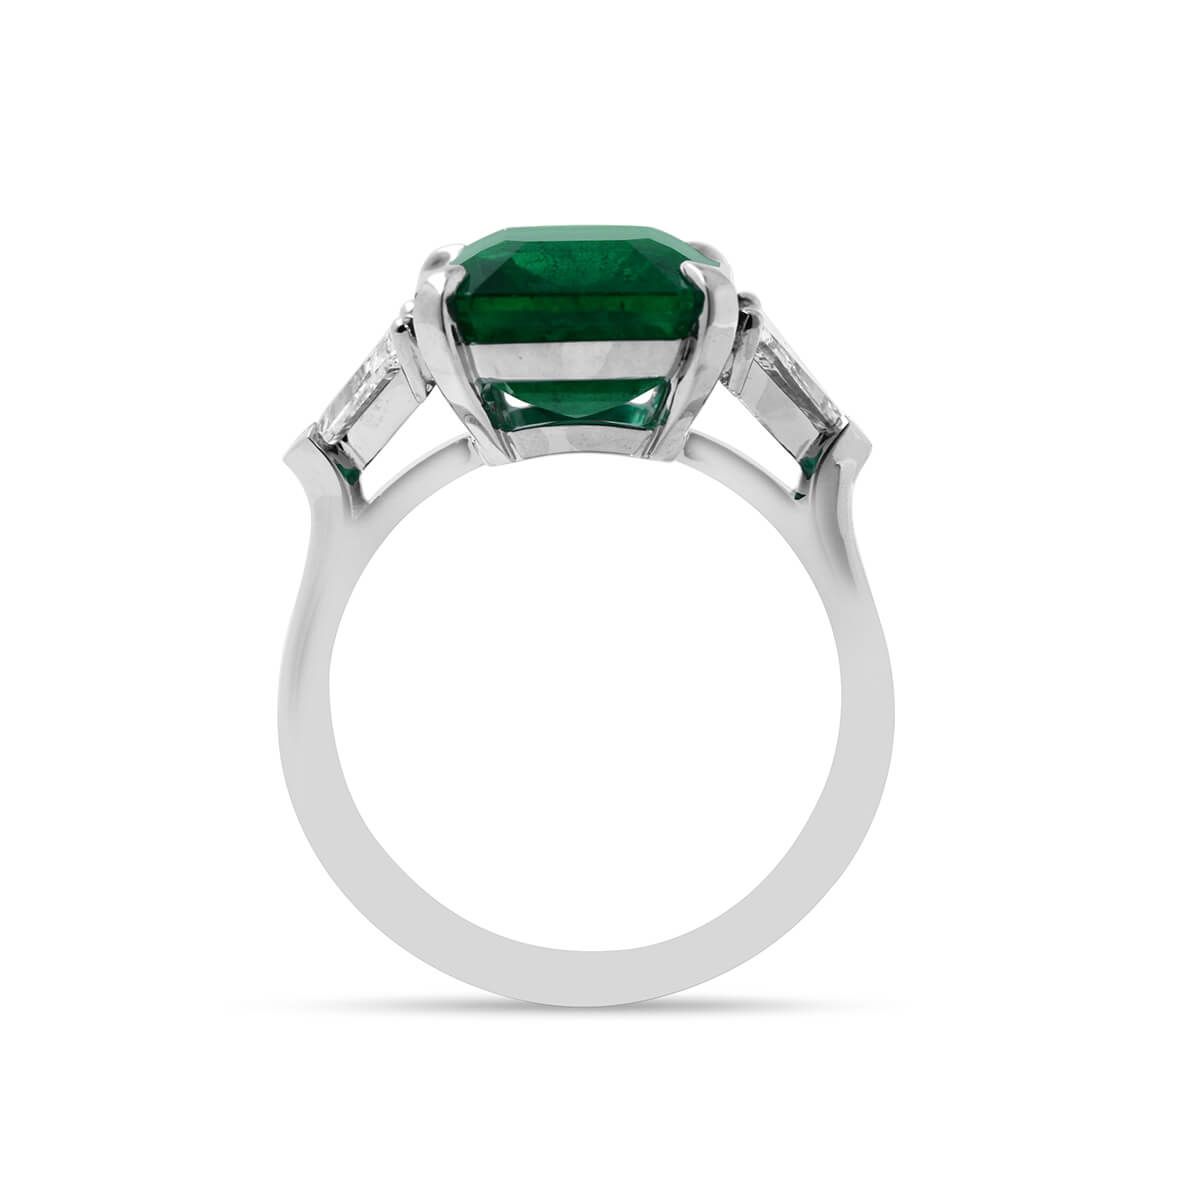 Natural Green Emerald Ring, 6.04 Carat, GRS Certified, GRS2018-078135